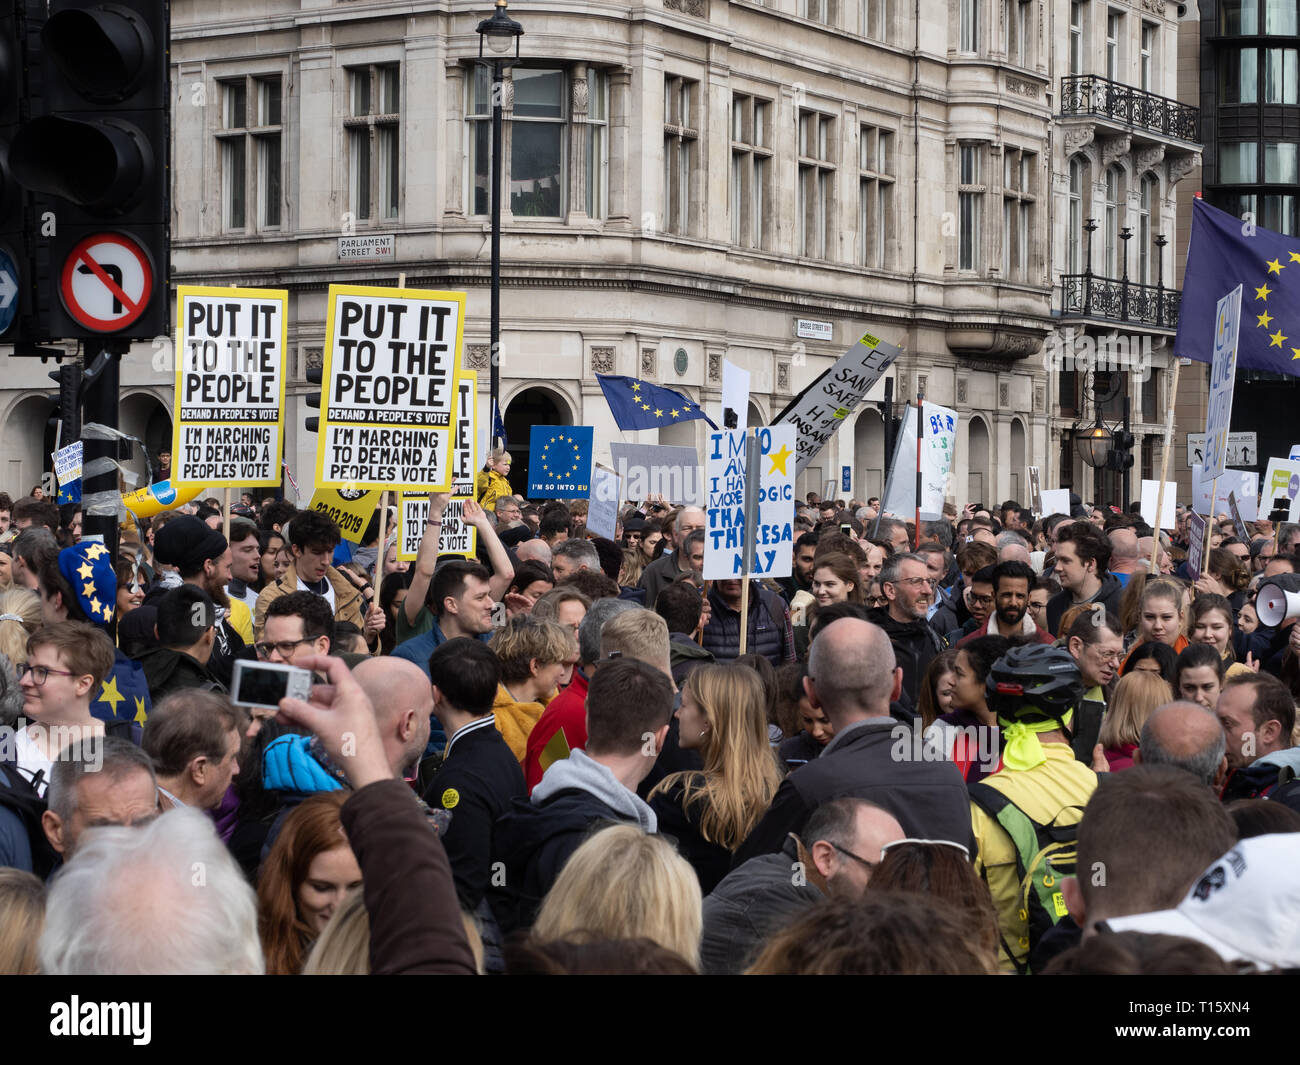 London, UK. 23rd Mar, 2019. Over 1 million people came down to London today to demand another vote on Brexit. Photography by Ghene Snowdon Credit: Ghene Snowdon/Alamy Live News Stock Photo